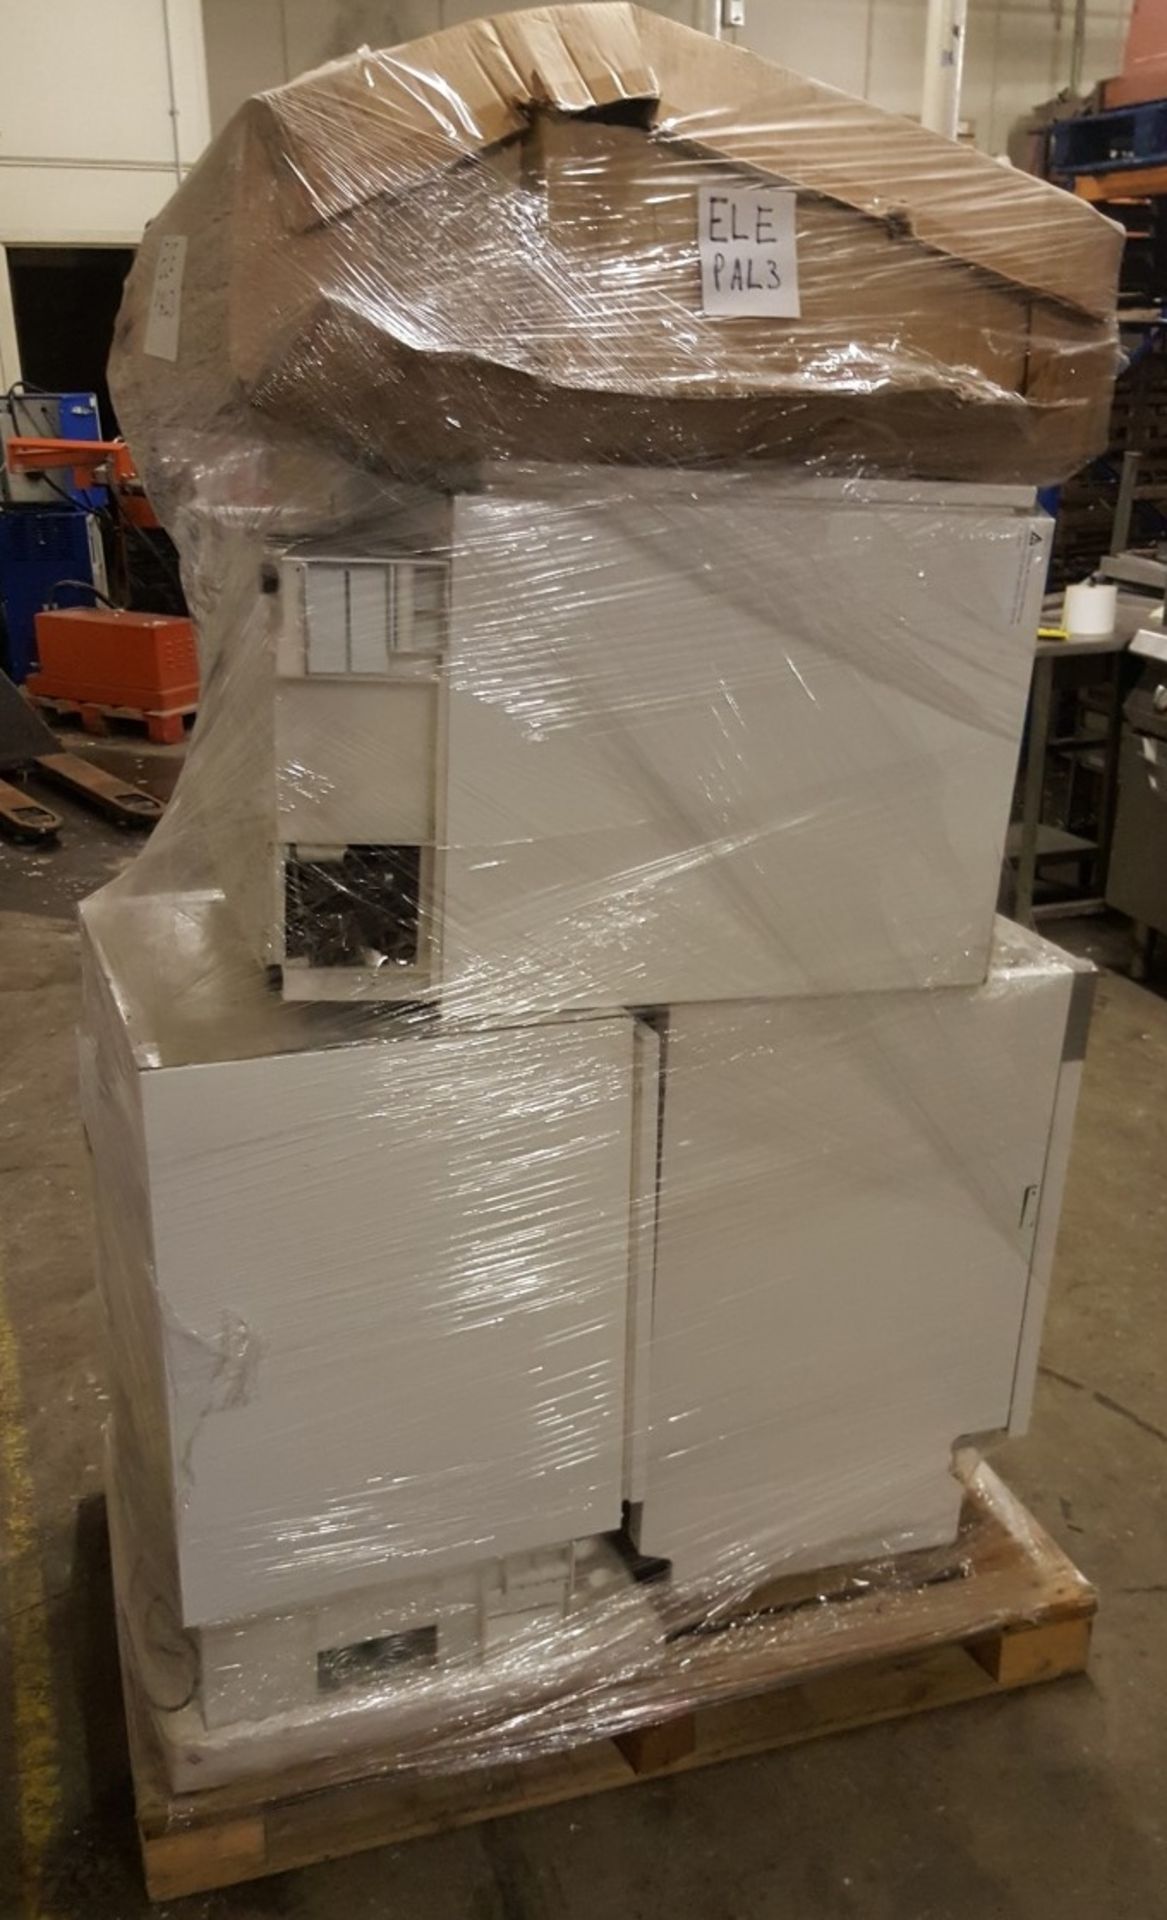 1 x Assorted Pallet of Domestic Appliances - Includes Fridges, Dishwasher & More REF: ELEPAL3 - Image 4 of 9